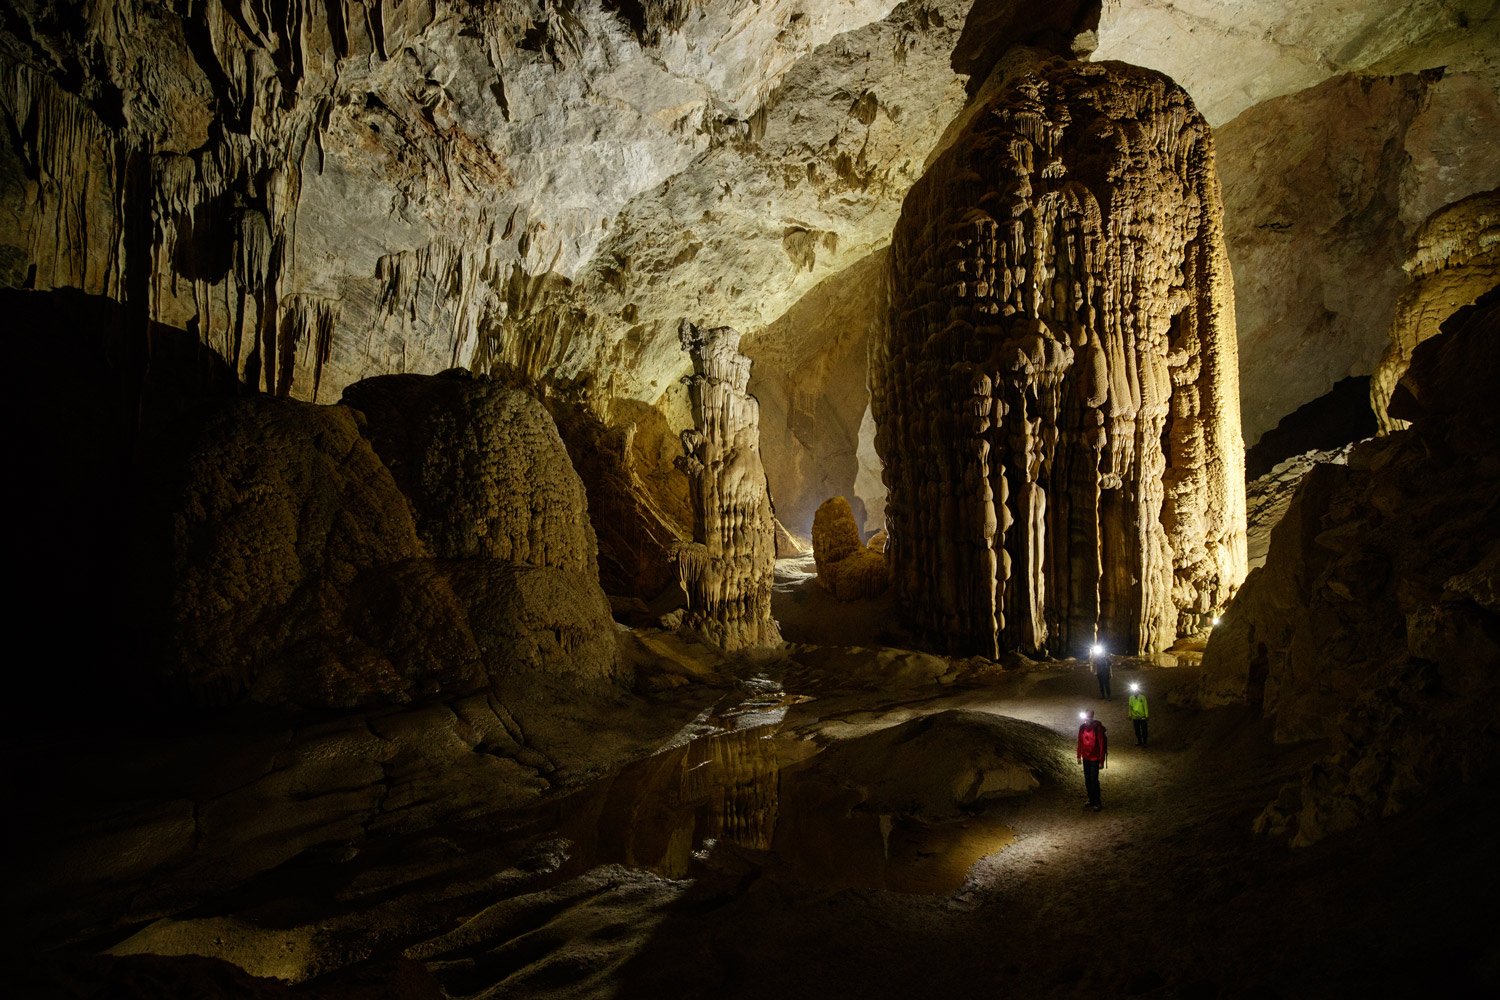 Son Doong Cave the biggest cave located in the core zone of Phong Nha - Ke Bang National Park